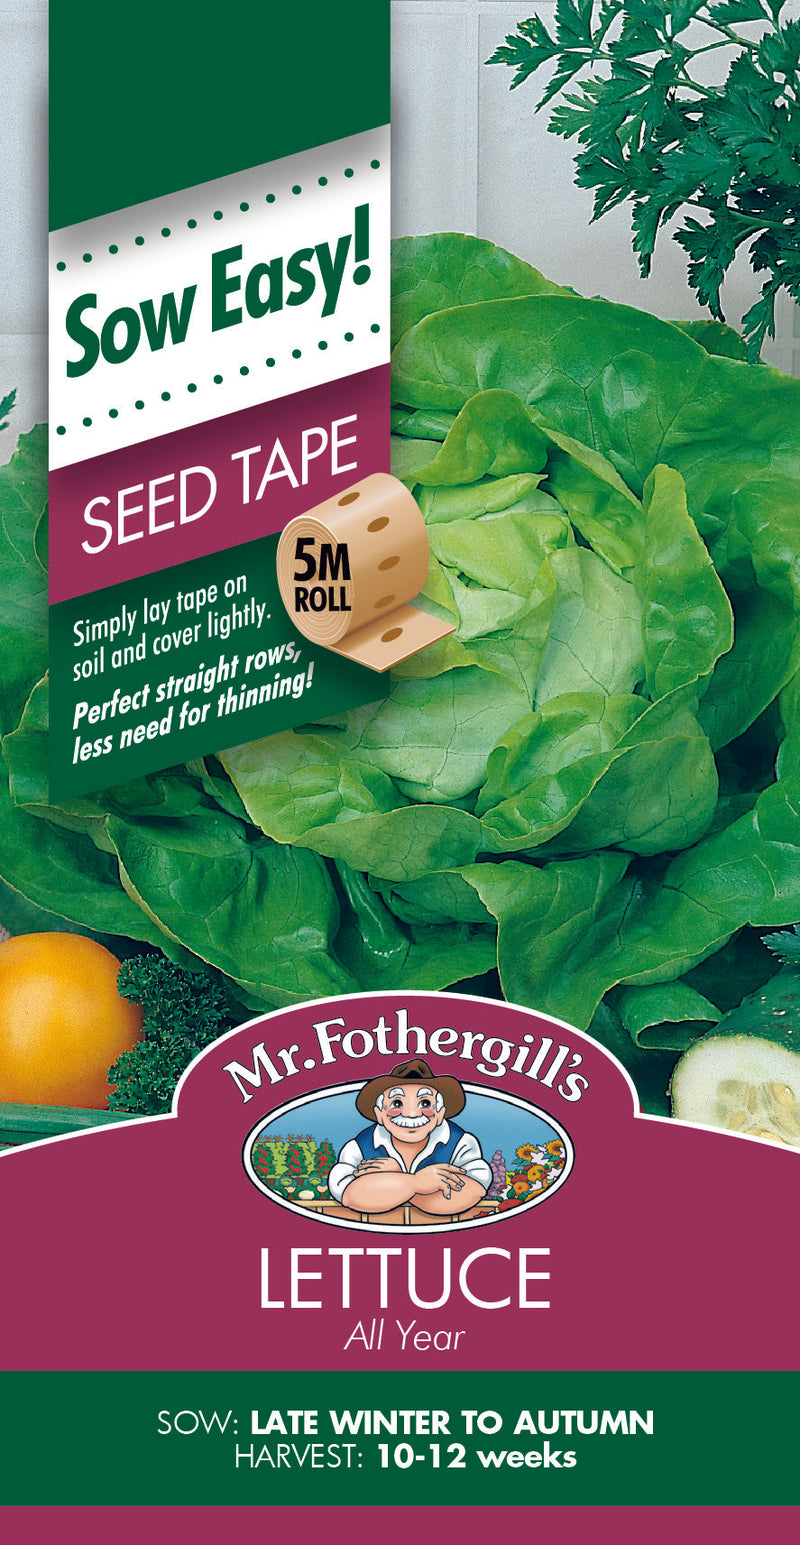 SEEDS D LETTUCE ALL YEAR SEED TAPE